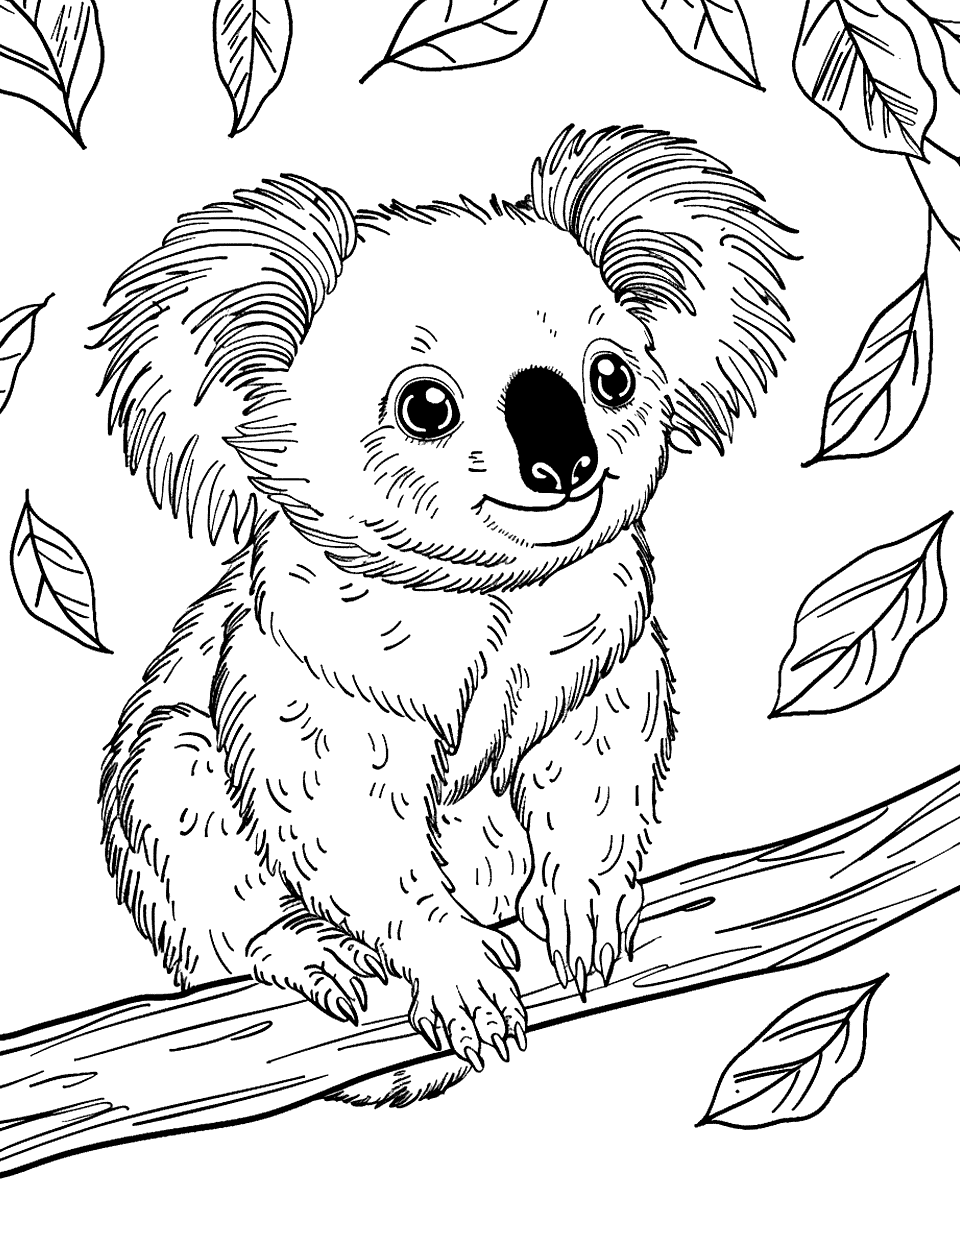 Koala and Falling Leaves Coloring Page - A koala watching leaves fall around it as autumn arrives.